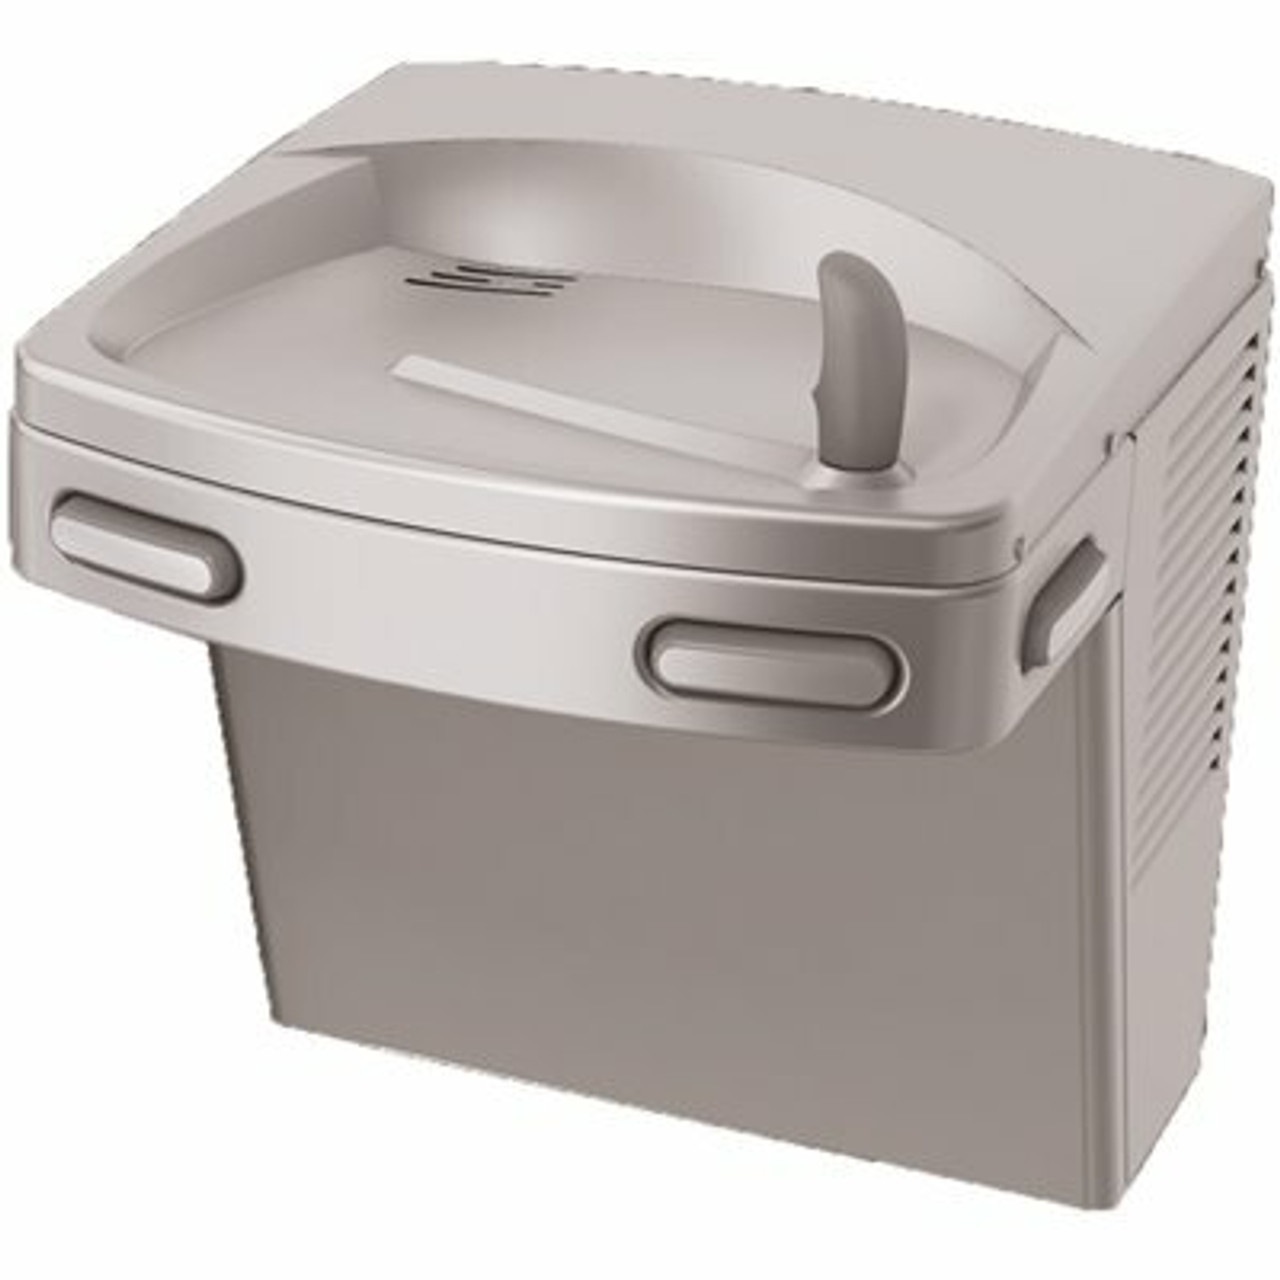 Oasis Versacooler Ii Energy/Water Conservation Model, Ada, Stainless Single Level Refrigerated Drinking Fountain